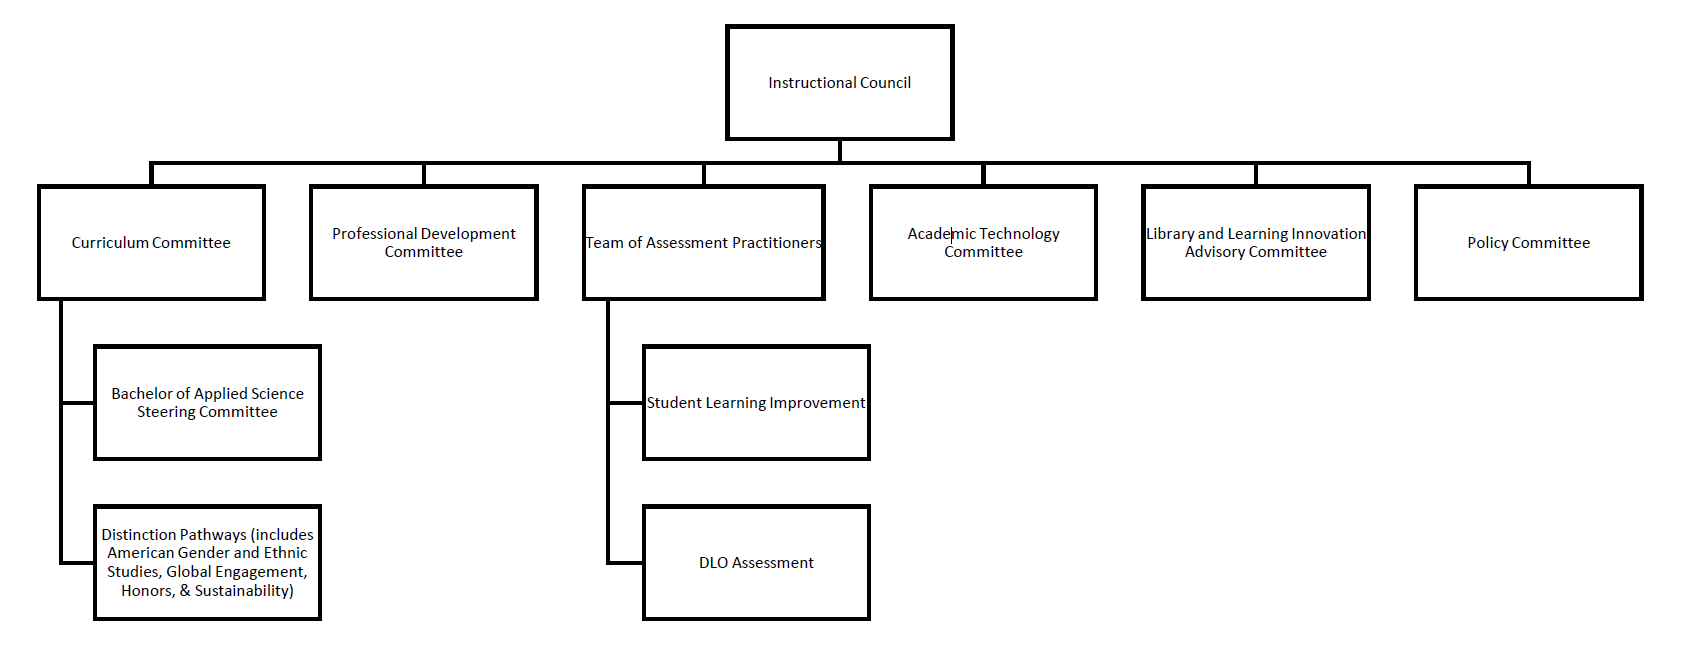 instructional council structure graphic